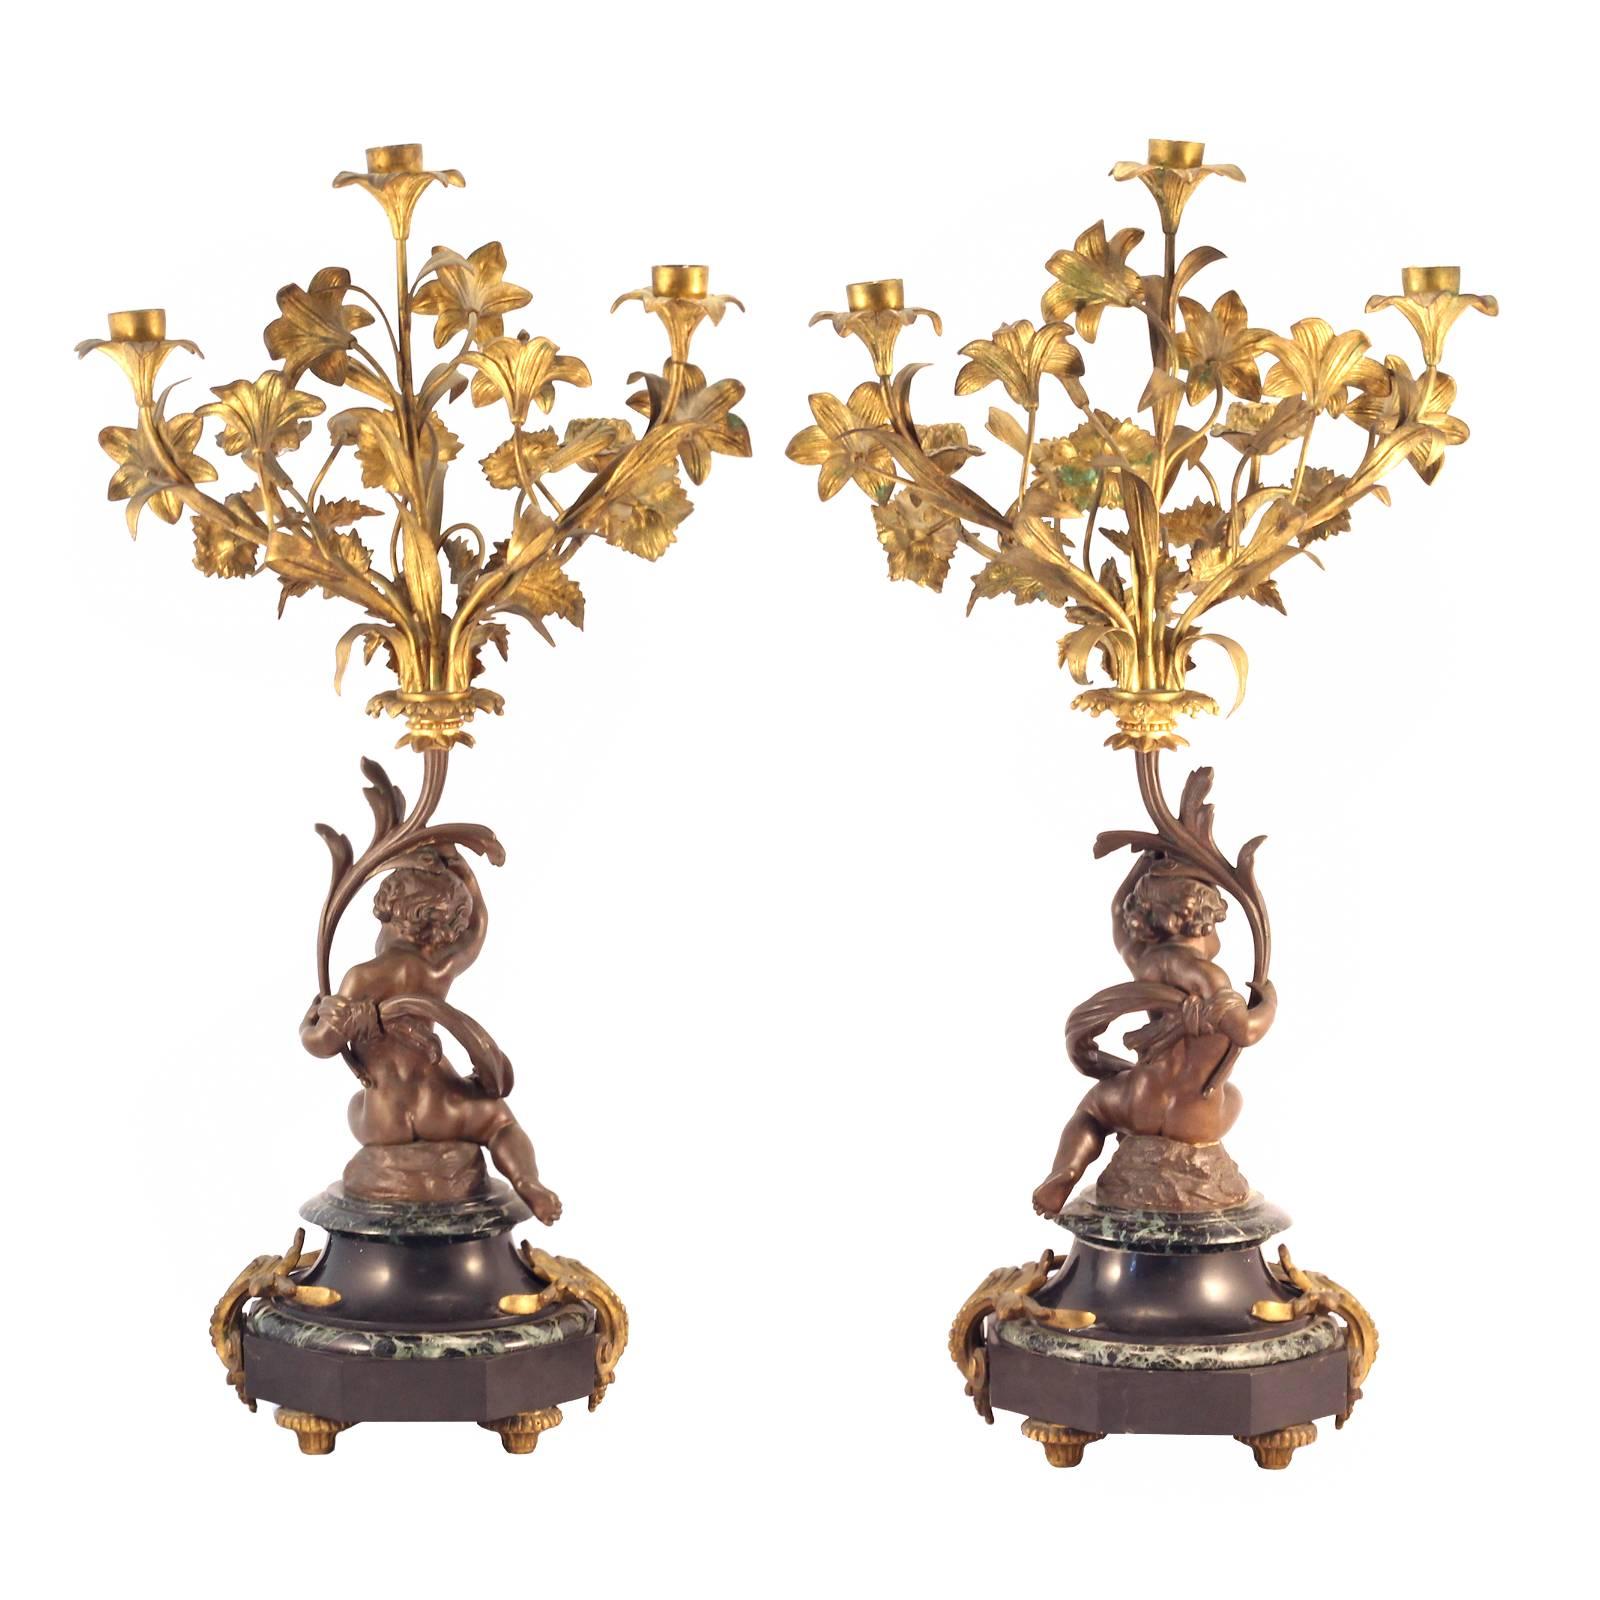 A pair of late 19th century Louis XVI style candelabra, featuring a marble base, cast bronze putti and gilt floral branches.